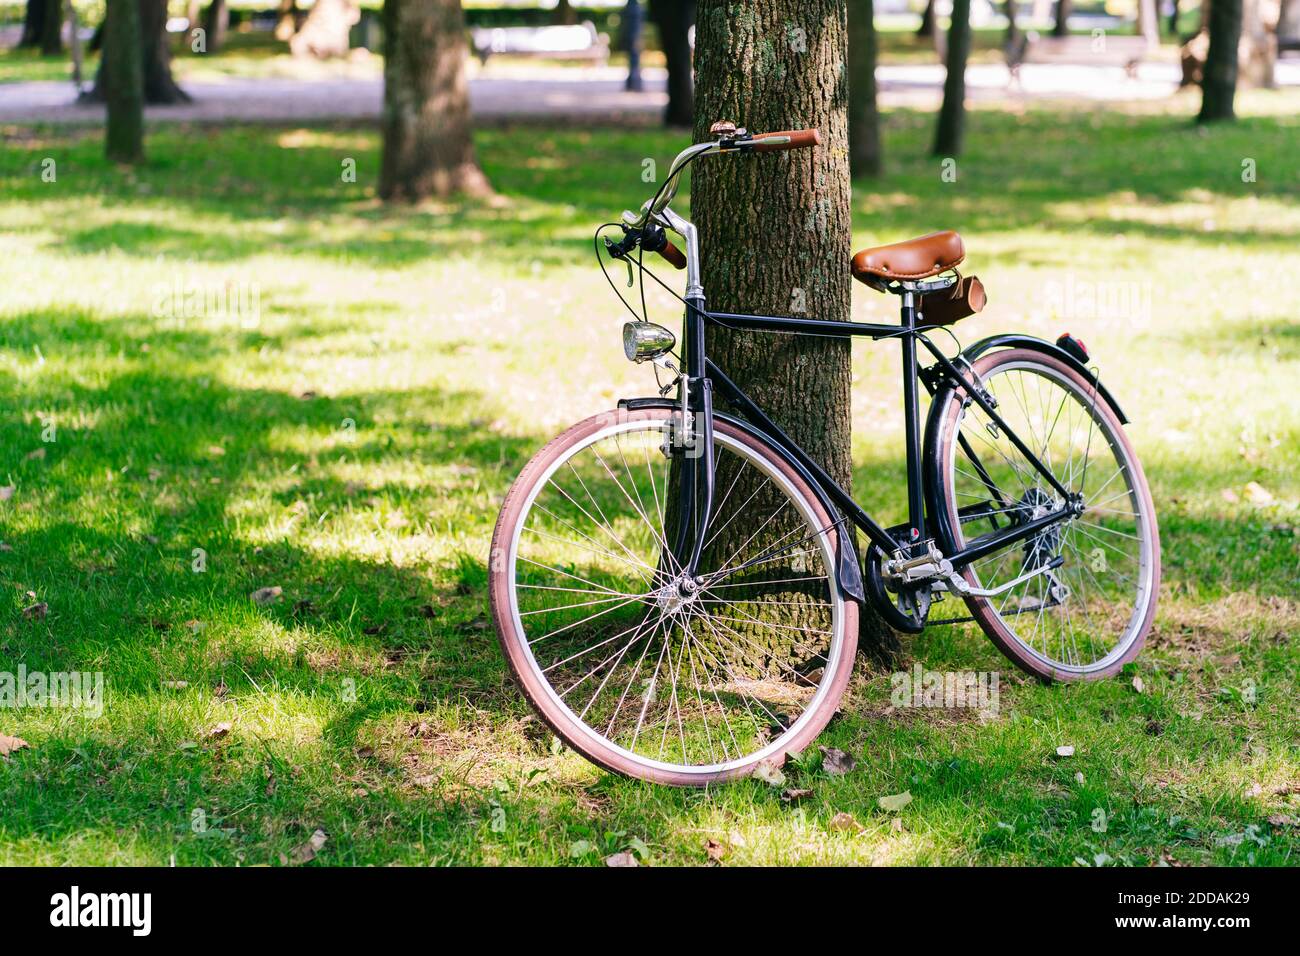 Bicycle parked on grassy field at public park Stock Photo